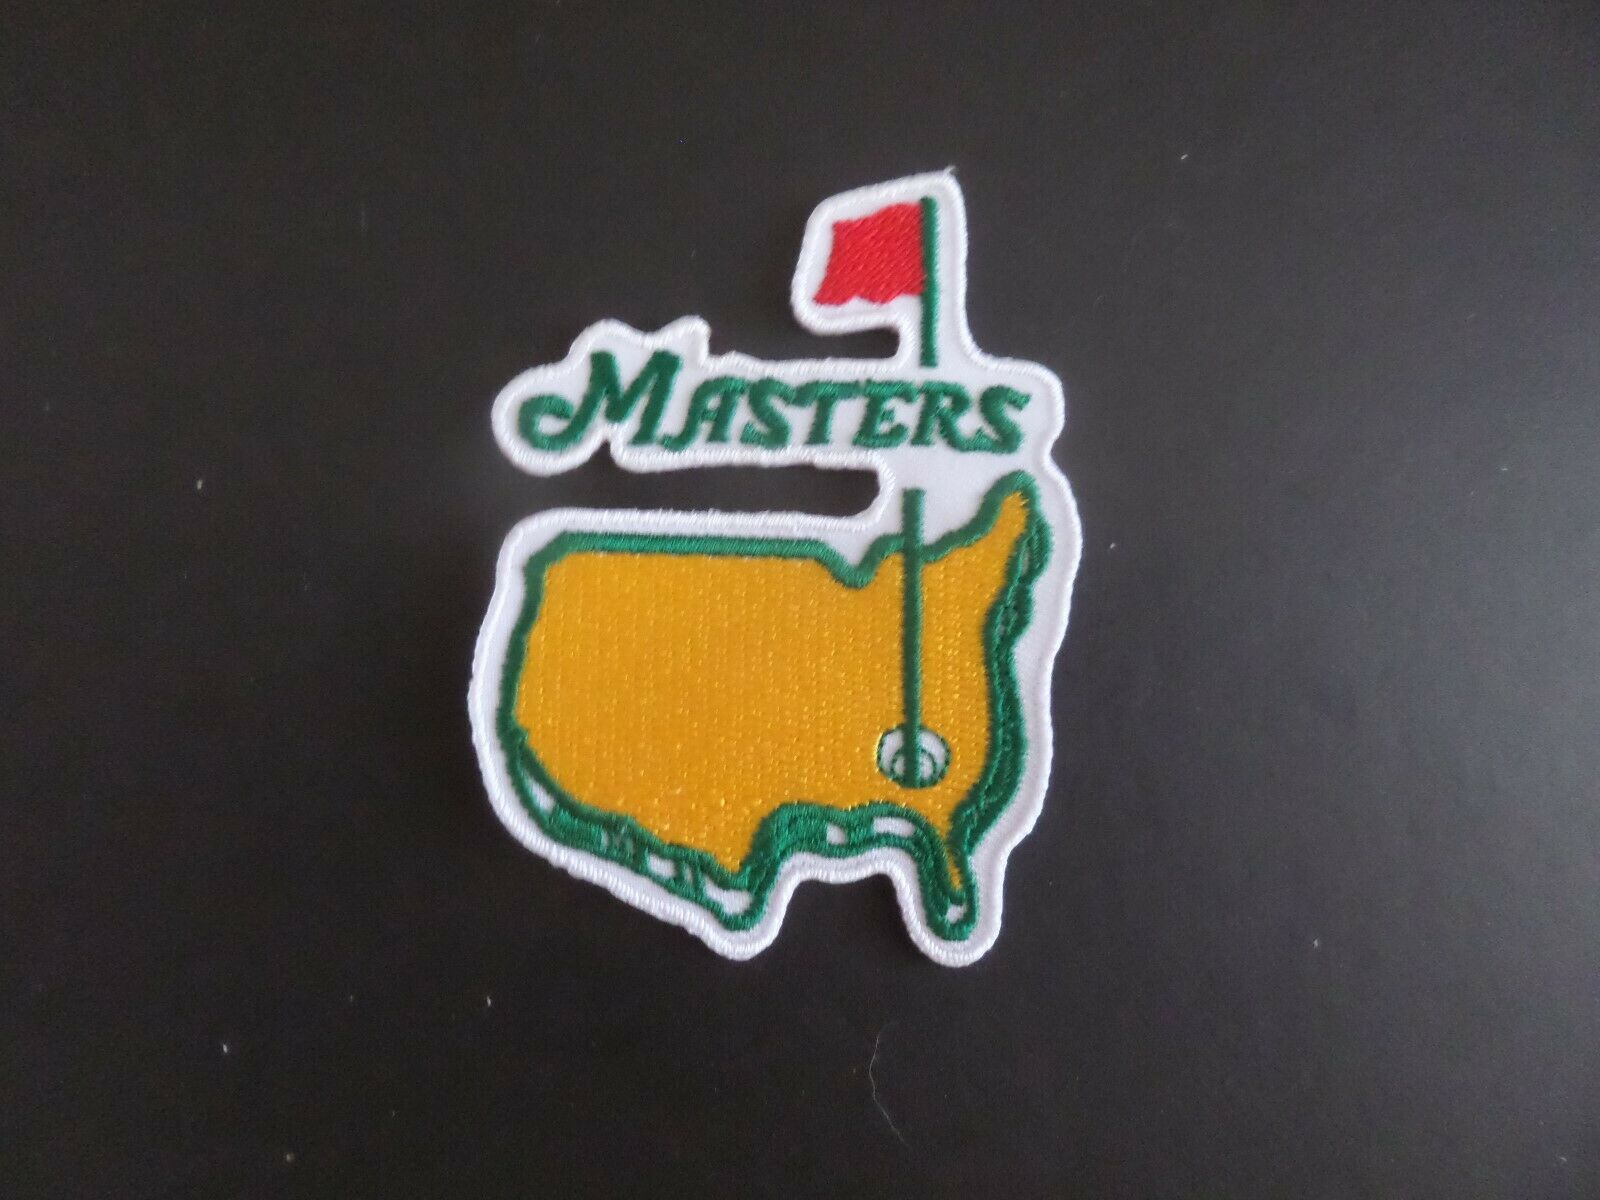 "the Masters Golf History" Embroidered Iron On 2-1/2 X 3-1/2 Patch #b